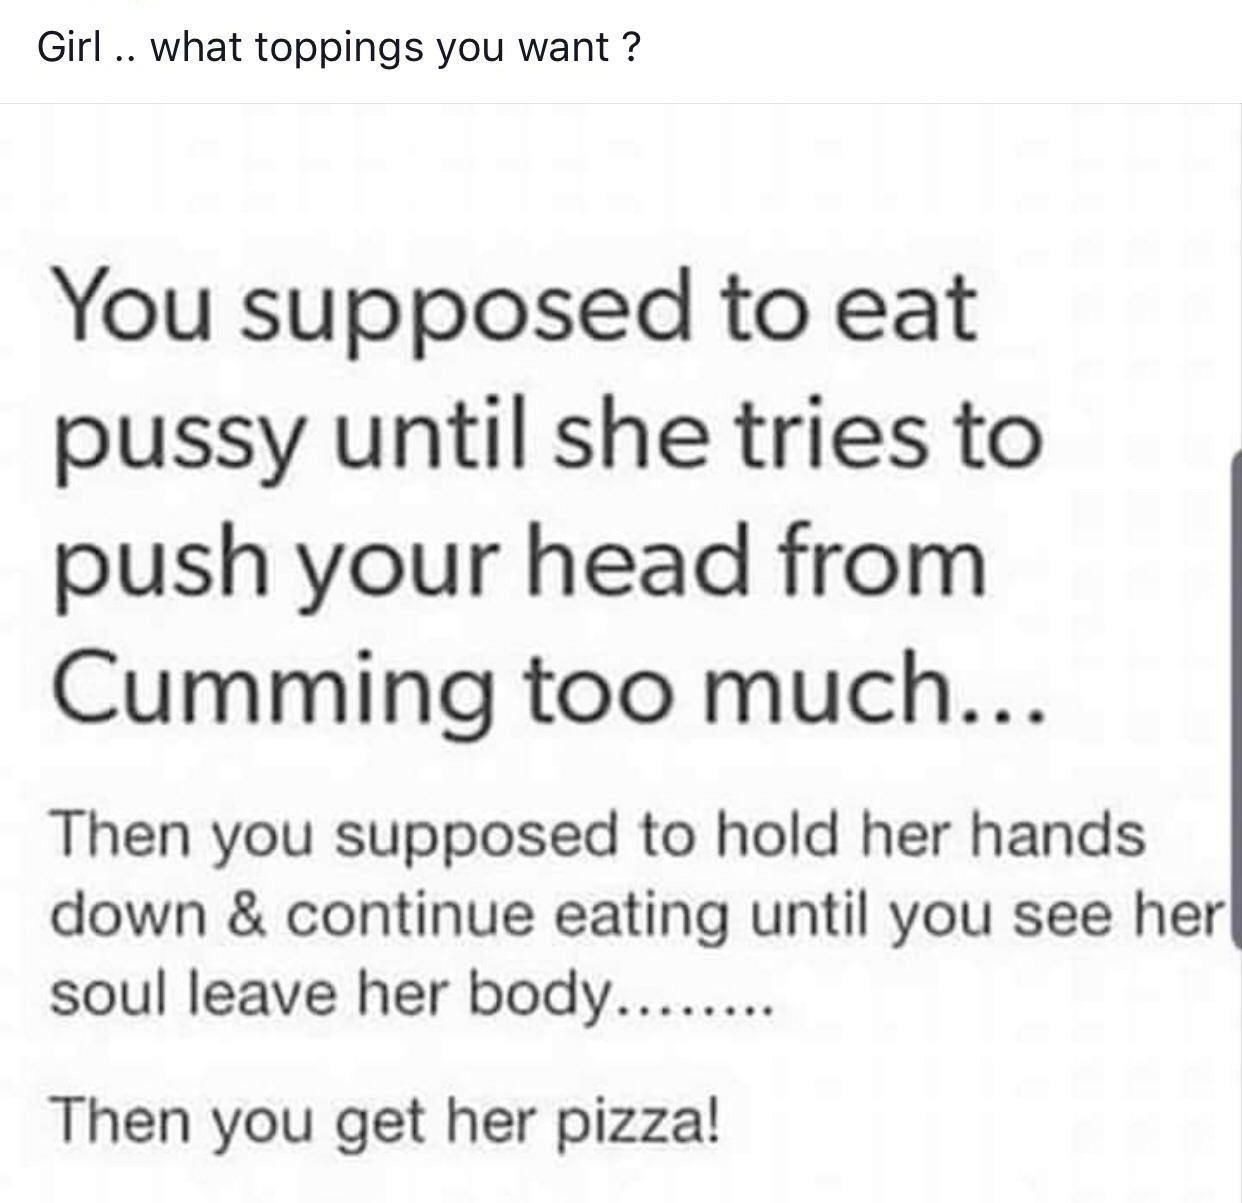 sex memes - Girl .. what toppings you want? You supposed to eat pussy until she tries to push your head from Cumming too much... Then you supposed to hold her hands down & continue eating until you see her soul leave her body........ Then you get her pi